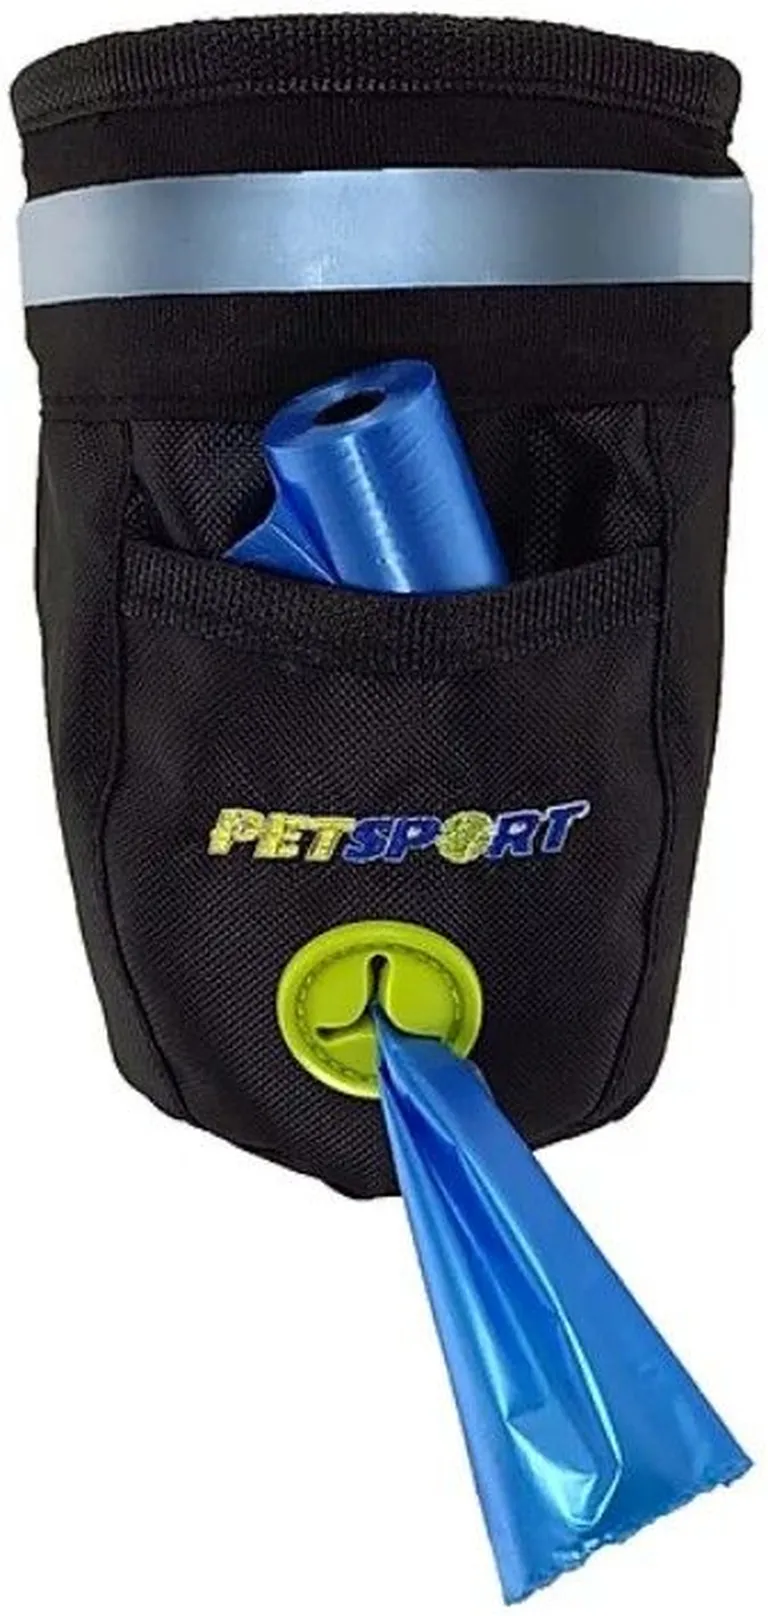 Petsport Biscuit Buddy Treat Pouch with Bag Dispenser Photo 2